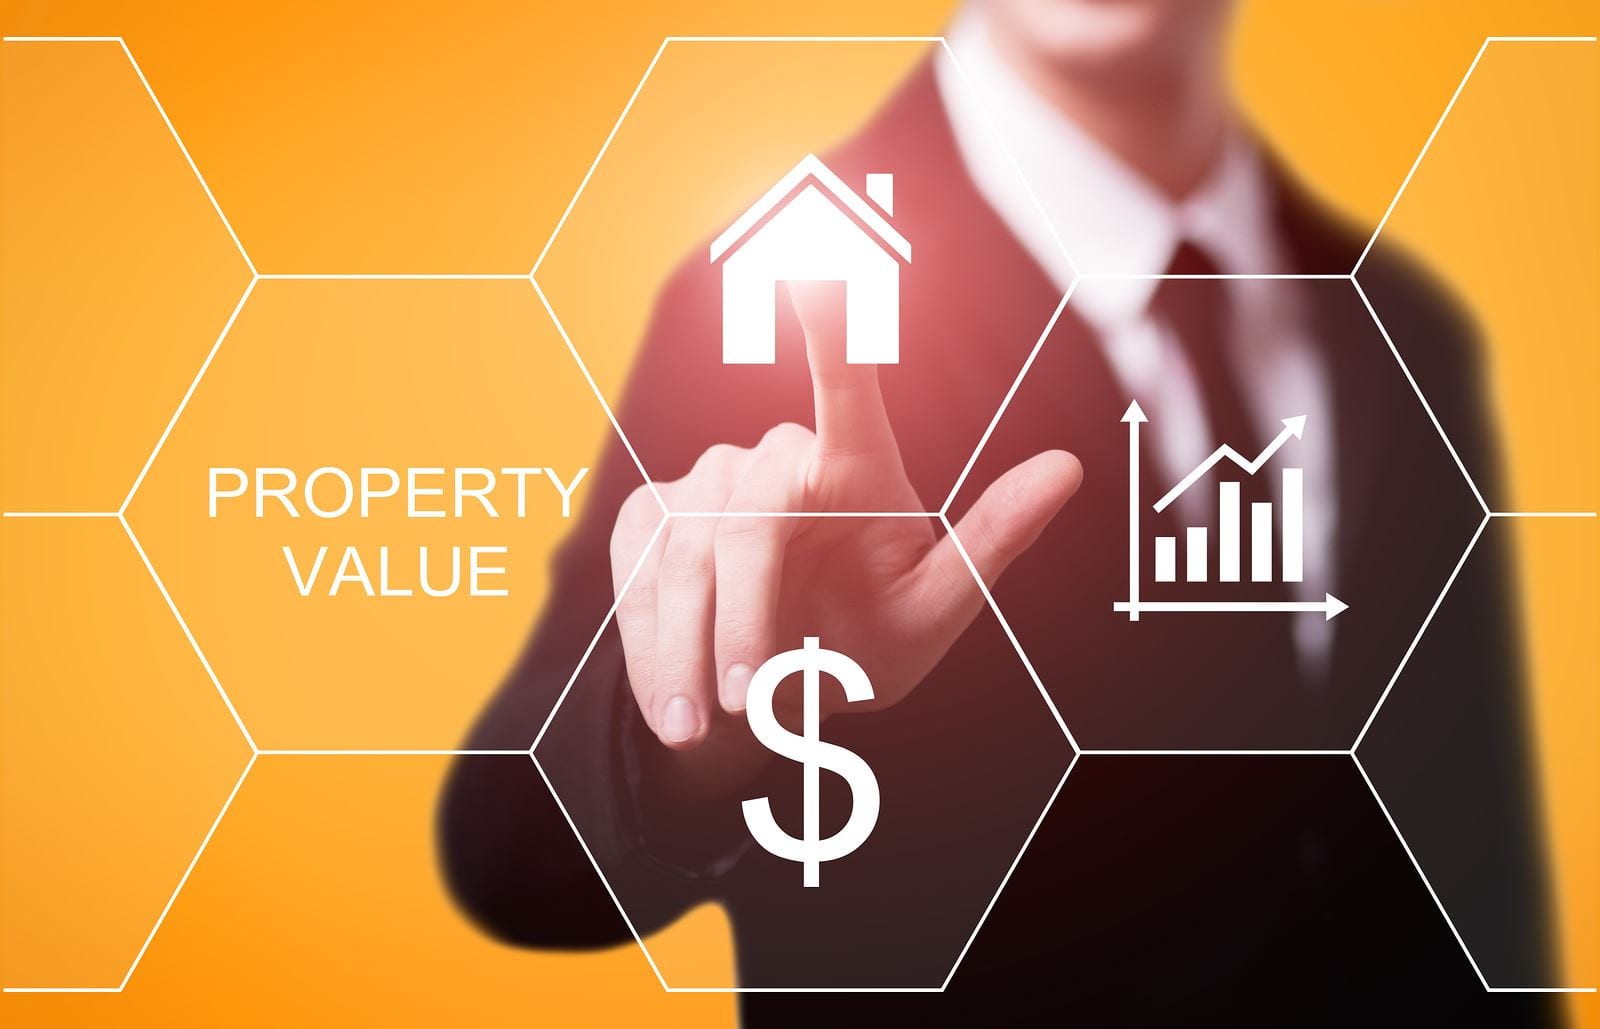 Property Valuation 